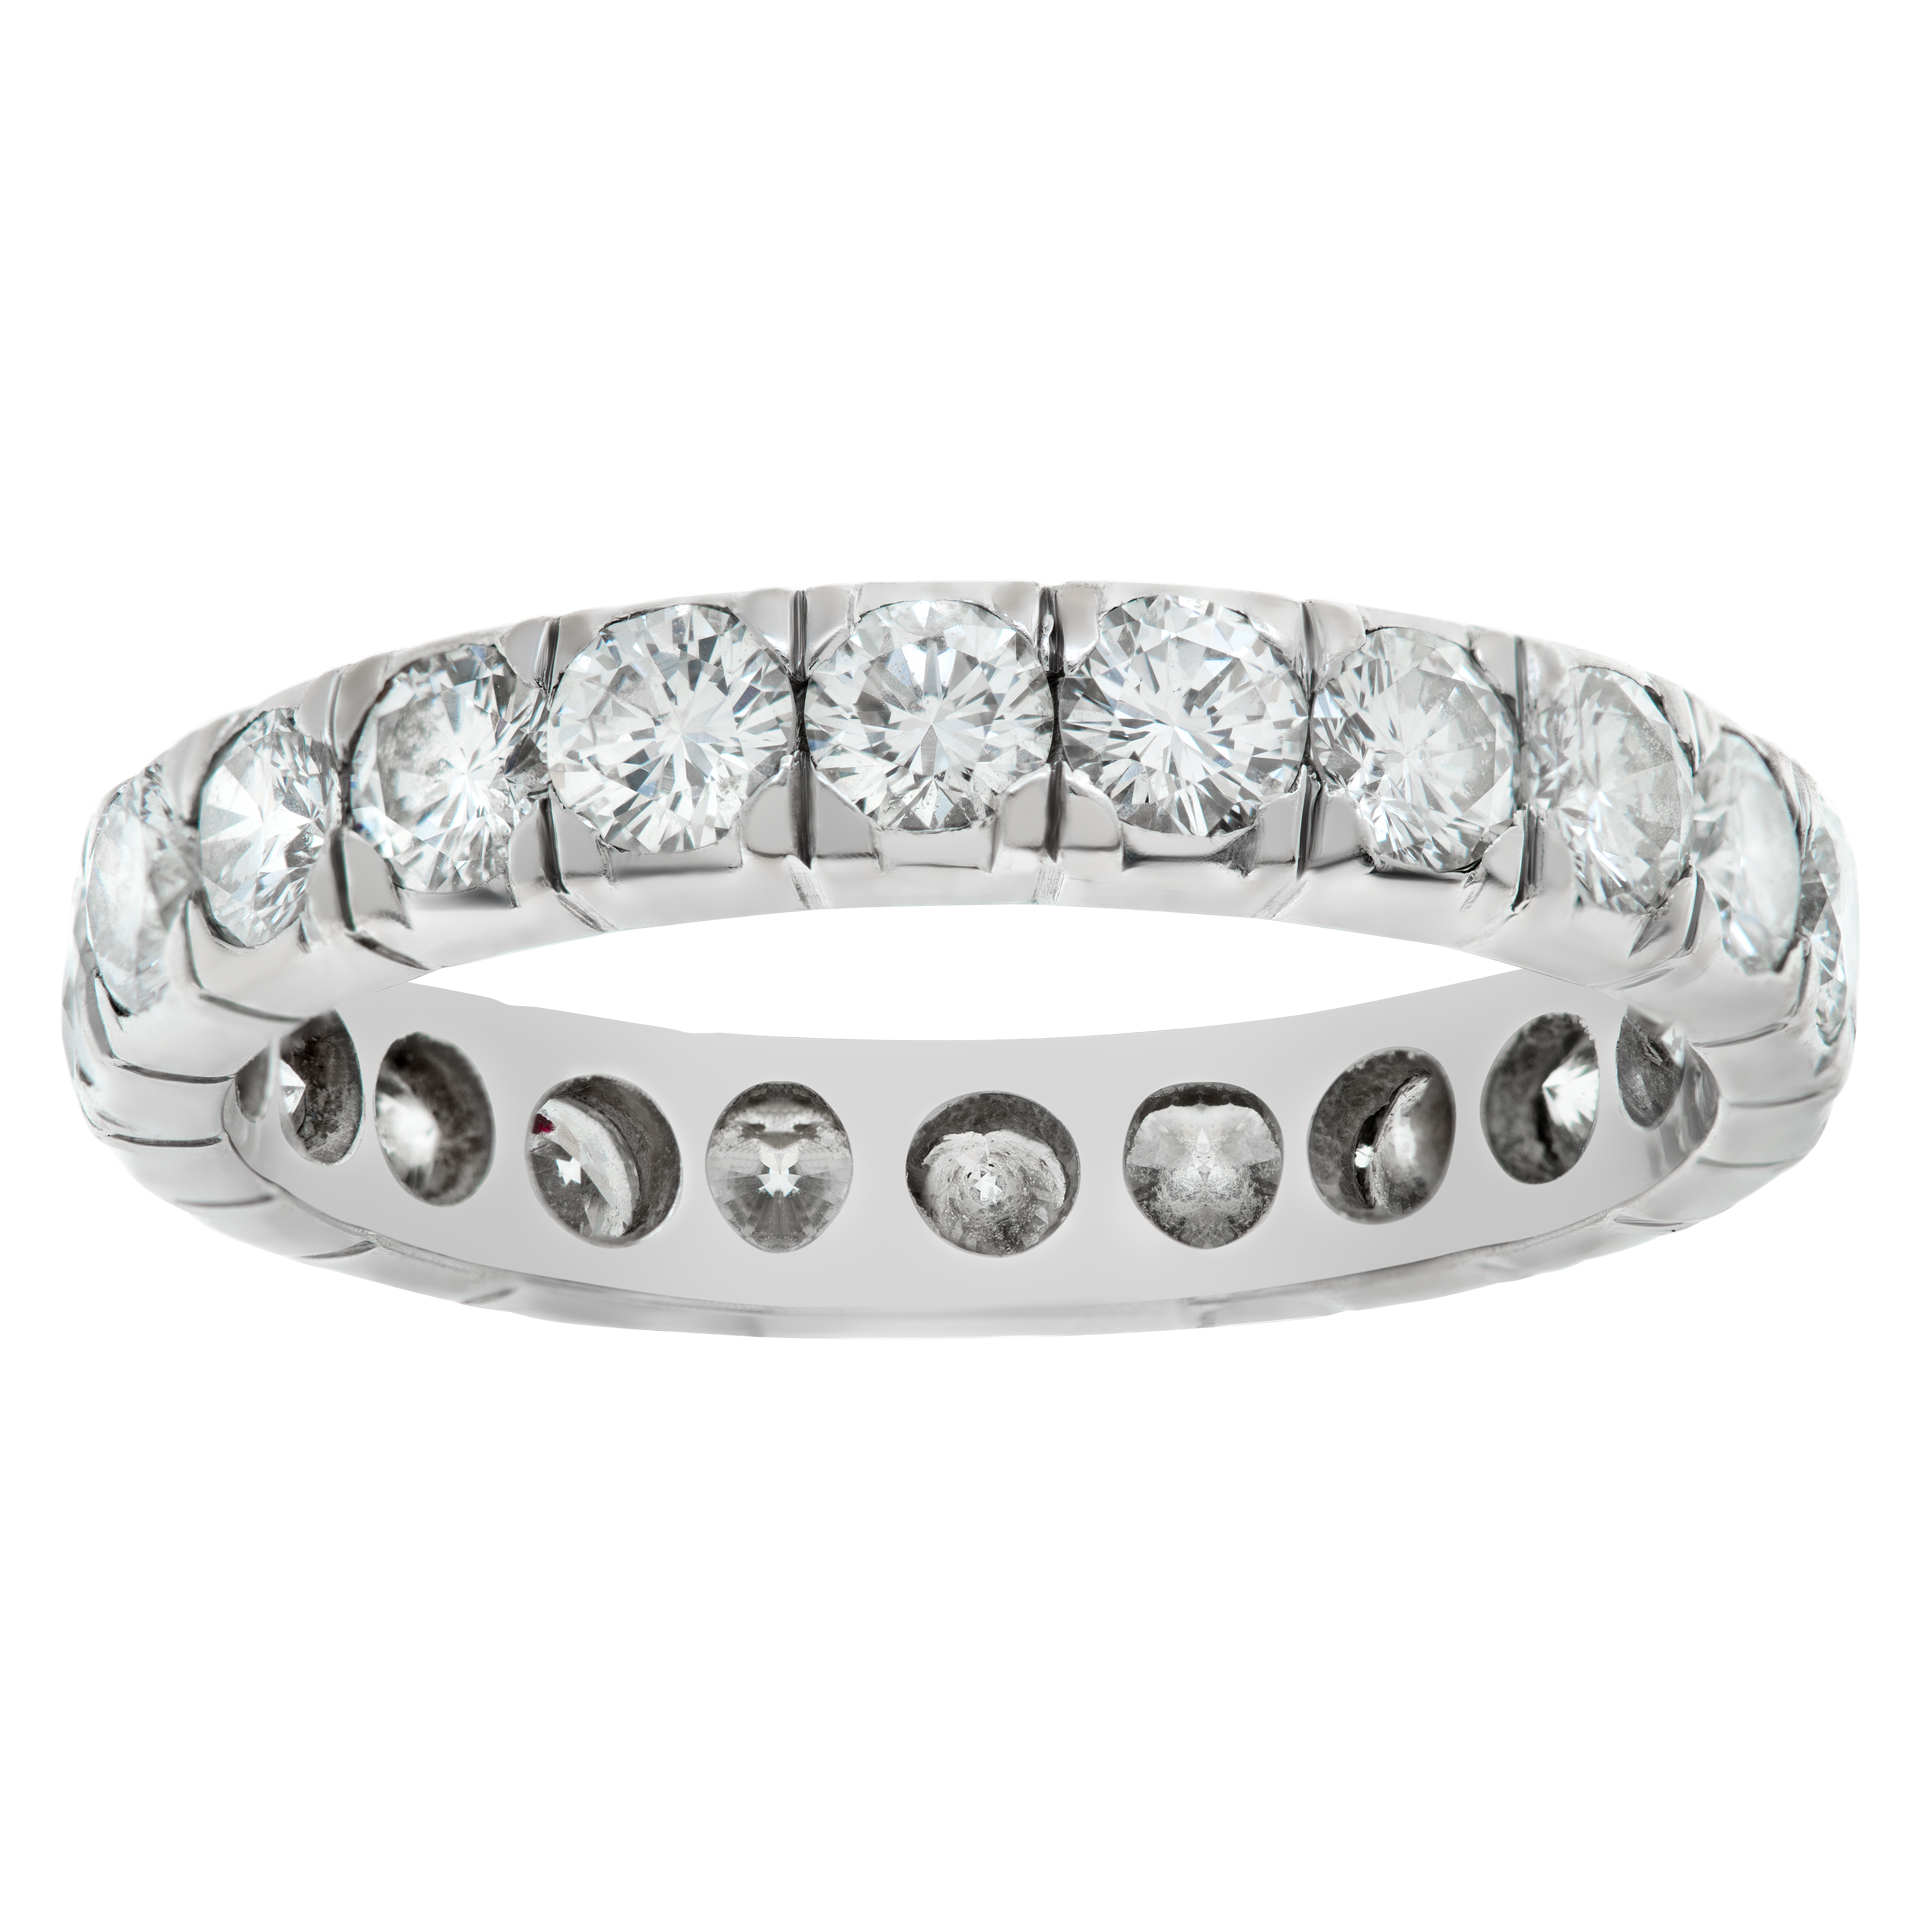 18k white gold eternity band w/ approx. 1.5 cts in G-H Color, VS Clarity diamonds